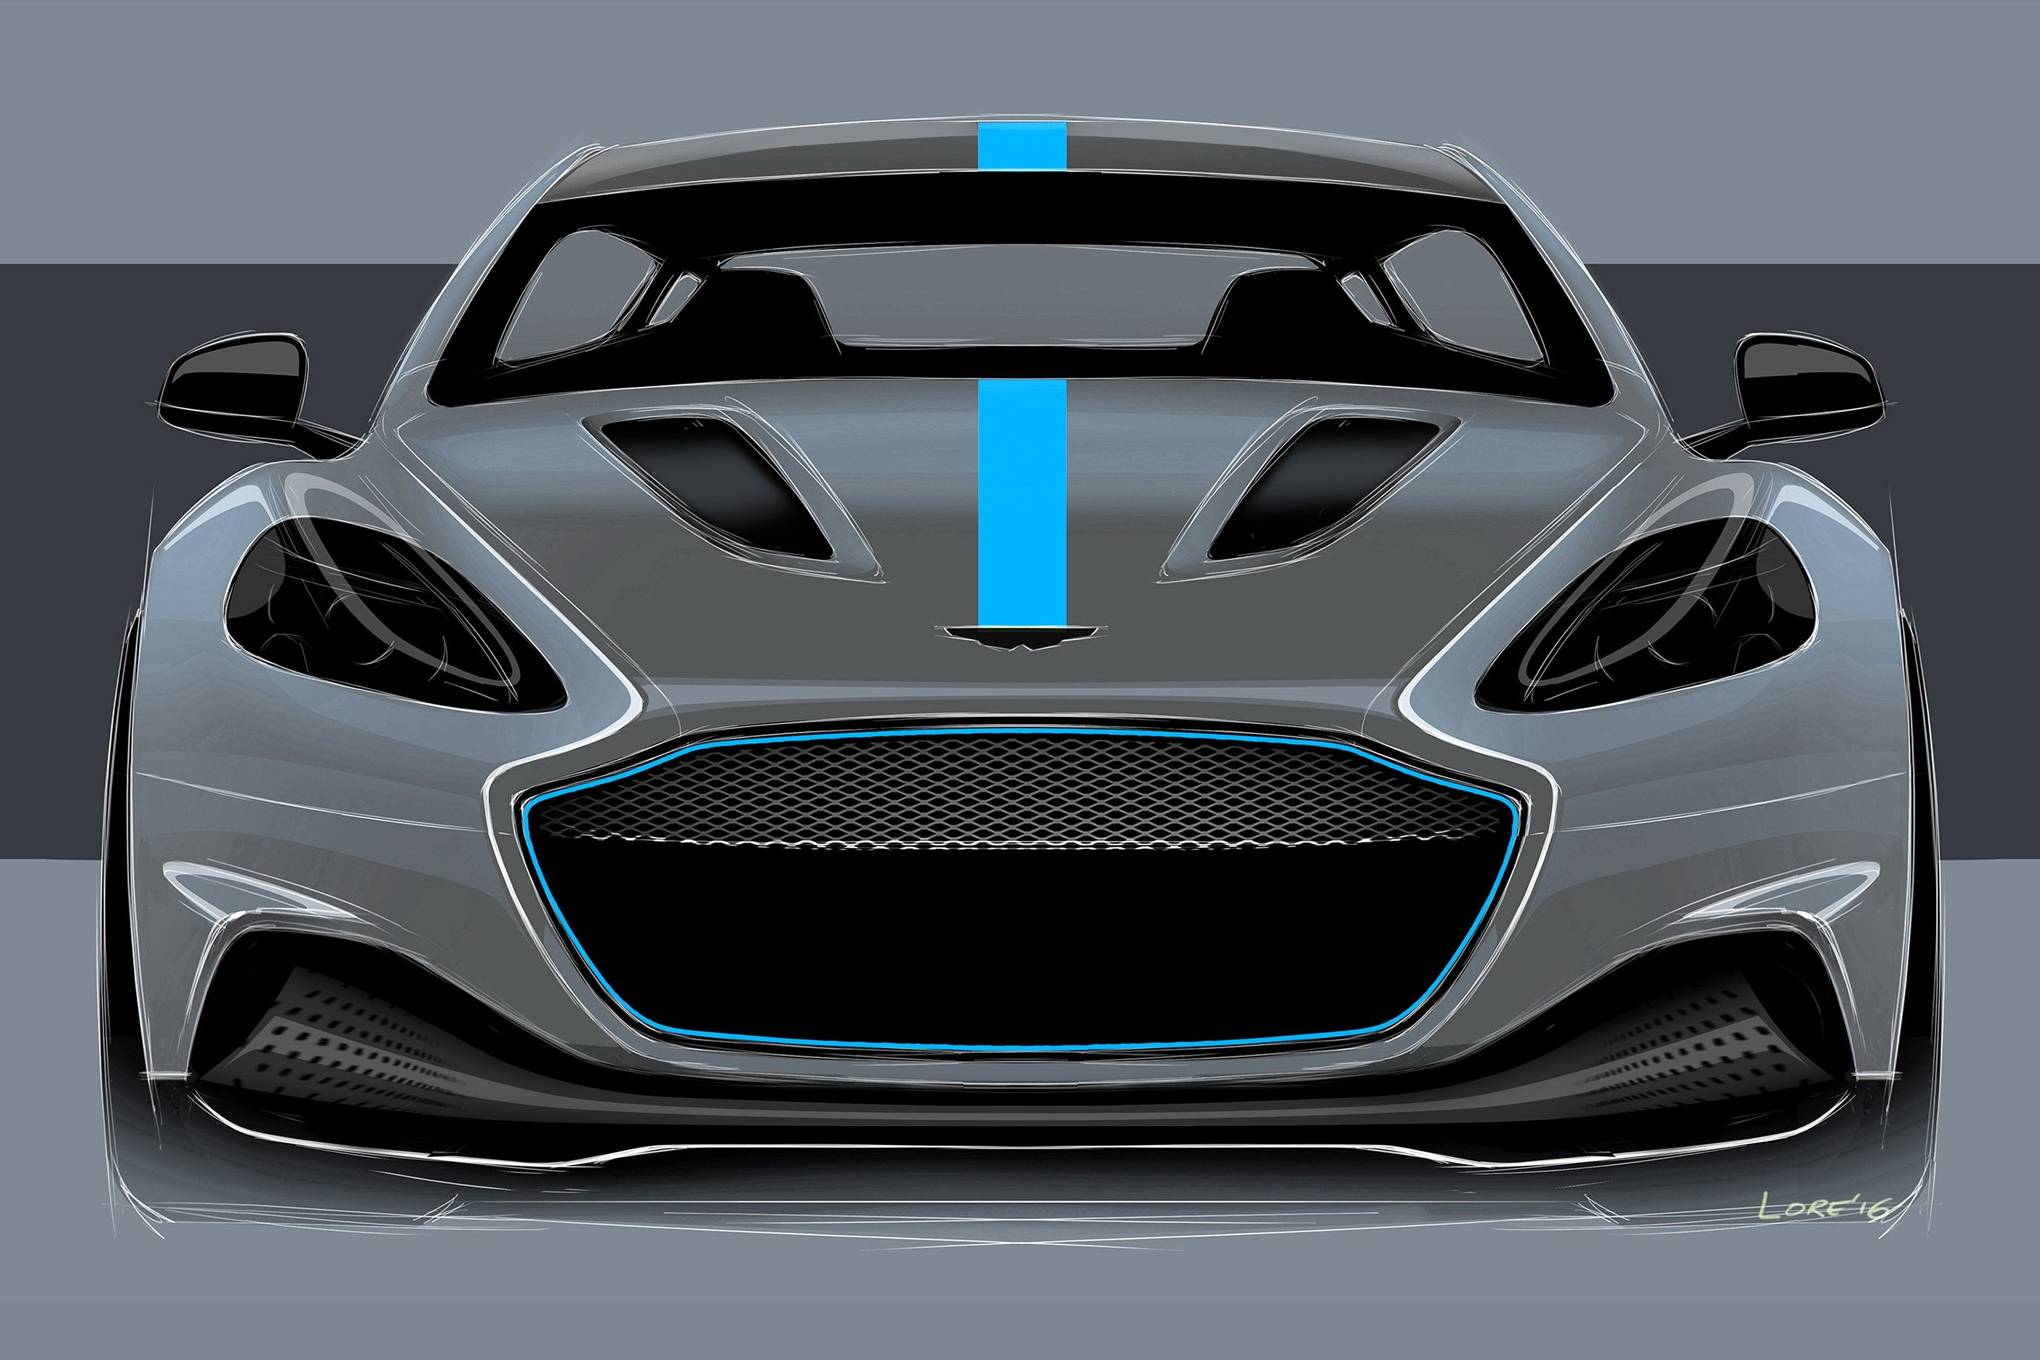 The Aston Martin RapidE is the British company's first allelectric car